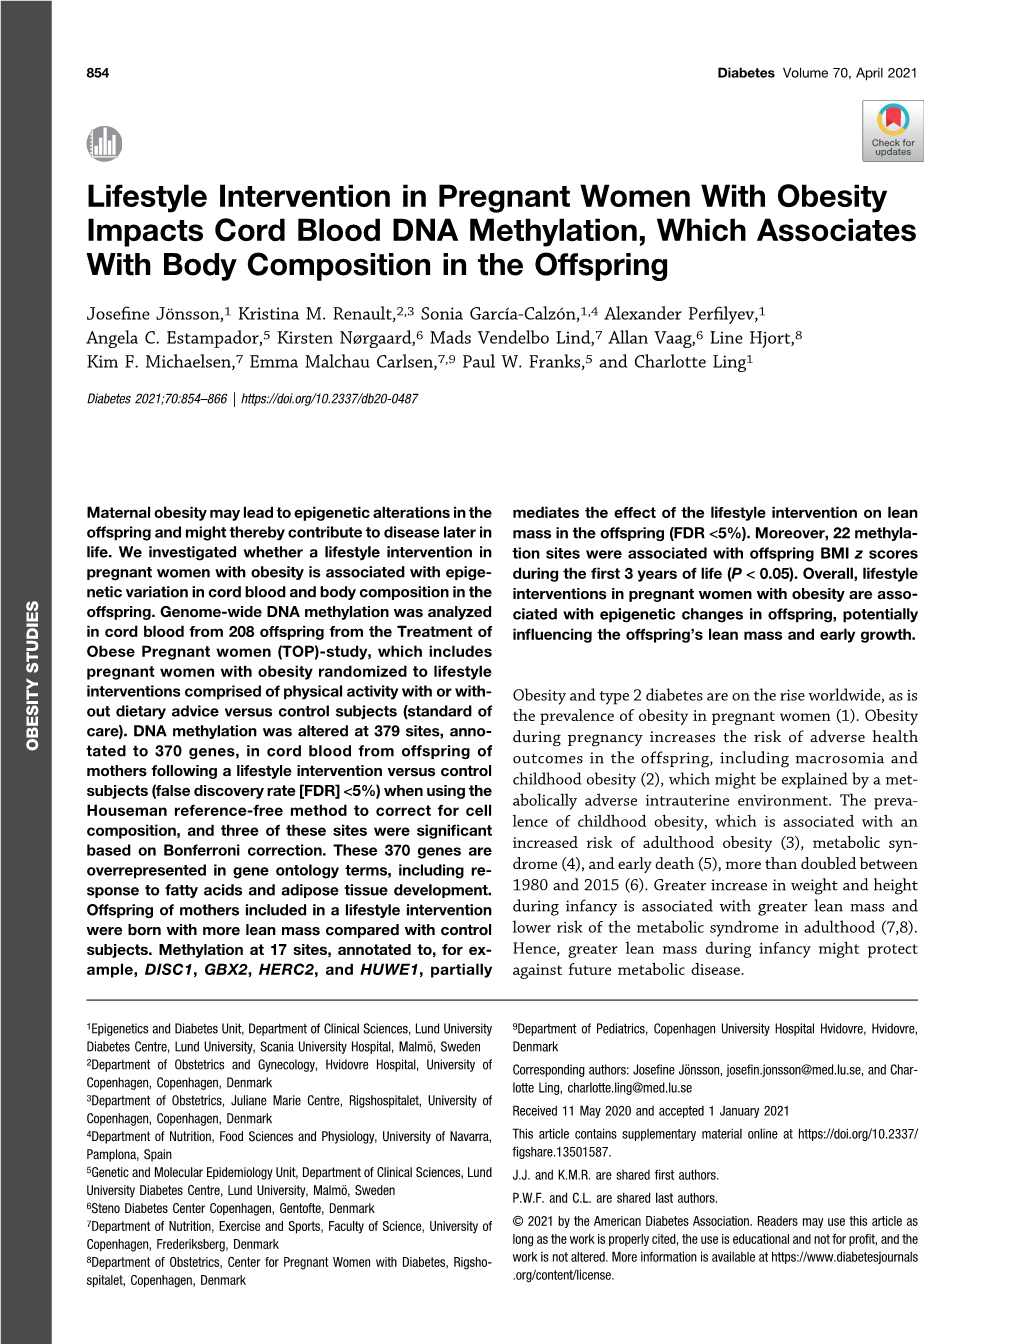 Lifestyle Intervention in Pregnant Women with Obesity Impacts Cord Blood DNA Methylation, Which Associates with Body Composition in the Offspring